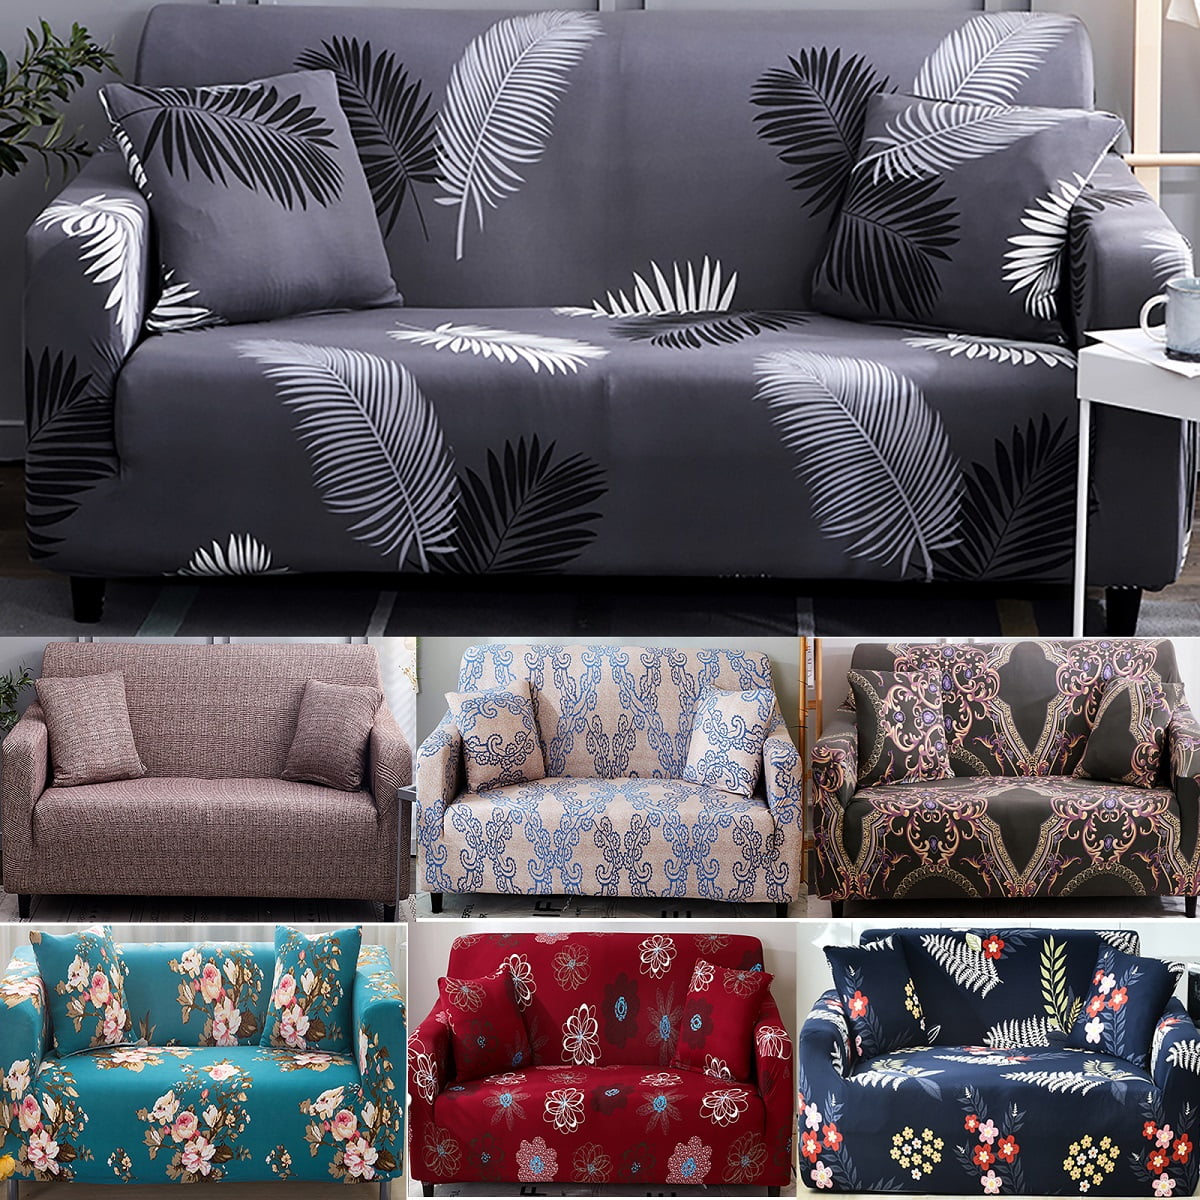 1 2 3 Seater Sofa Cover Slipcover Stretch Elastic Couch Home Furniture Protector 